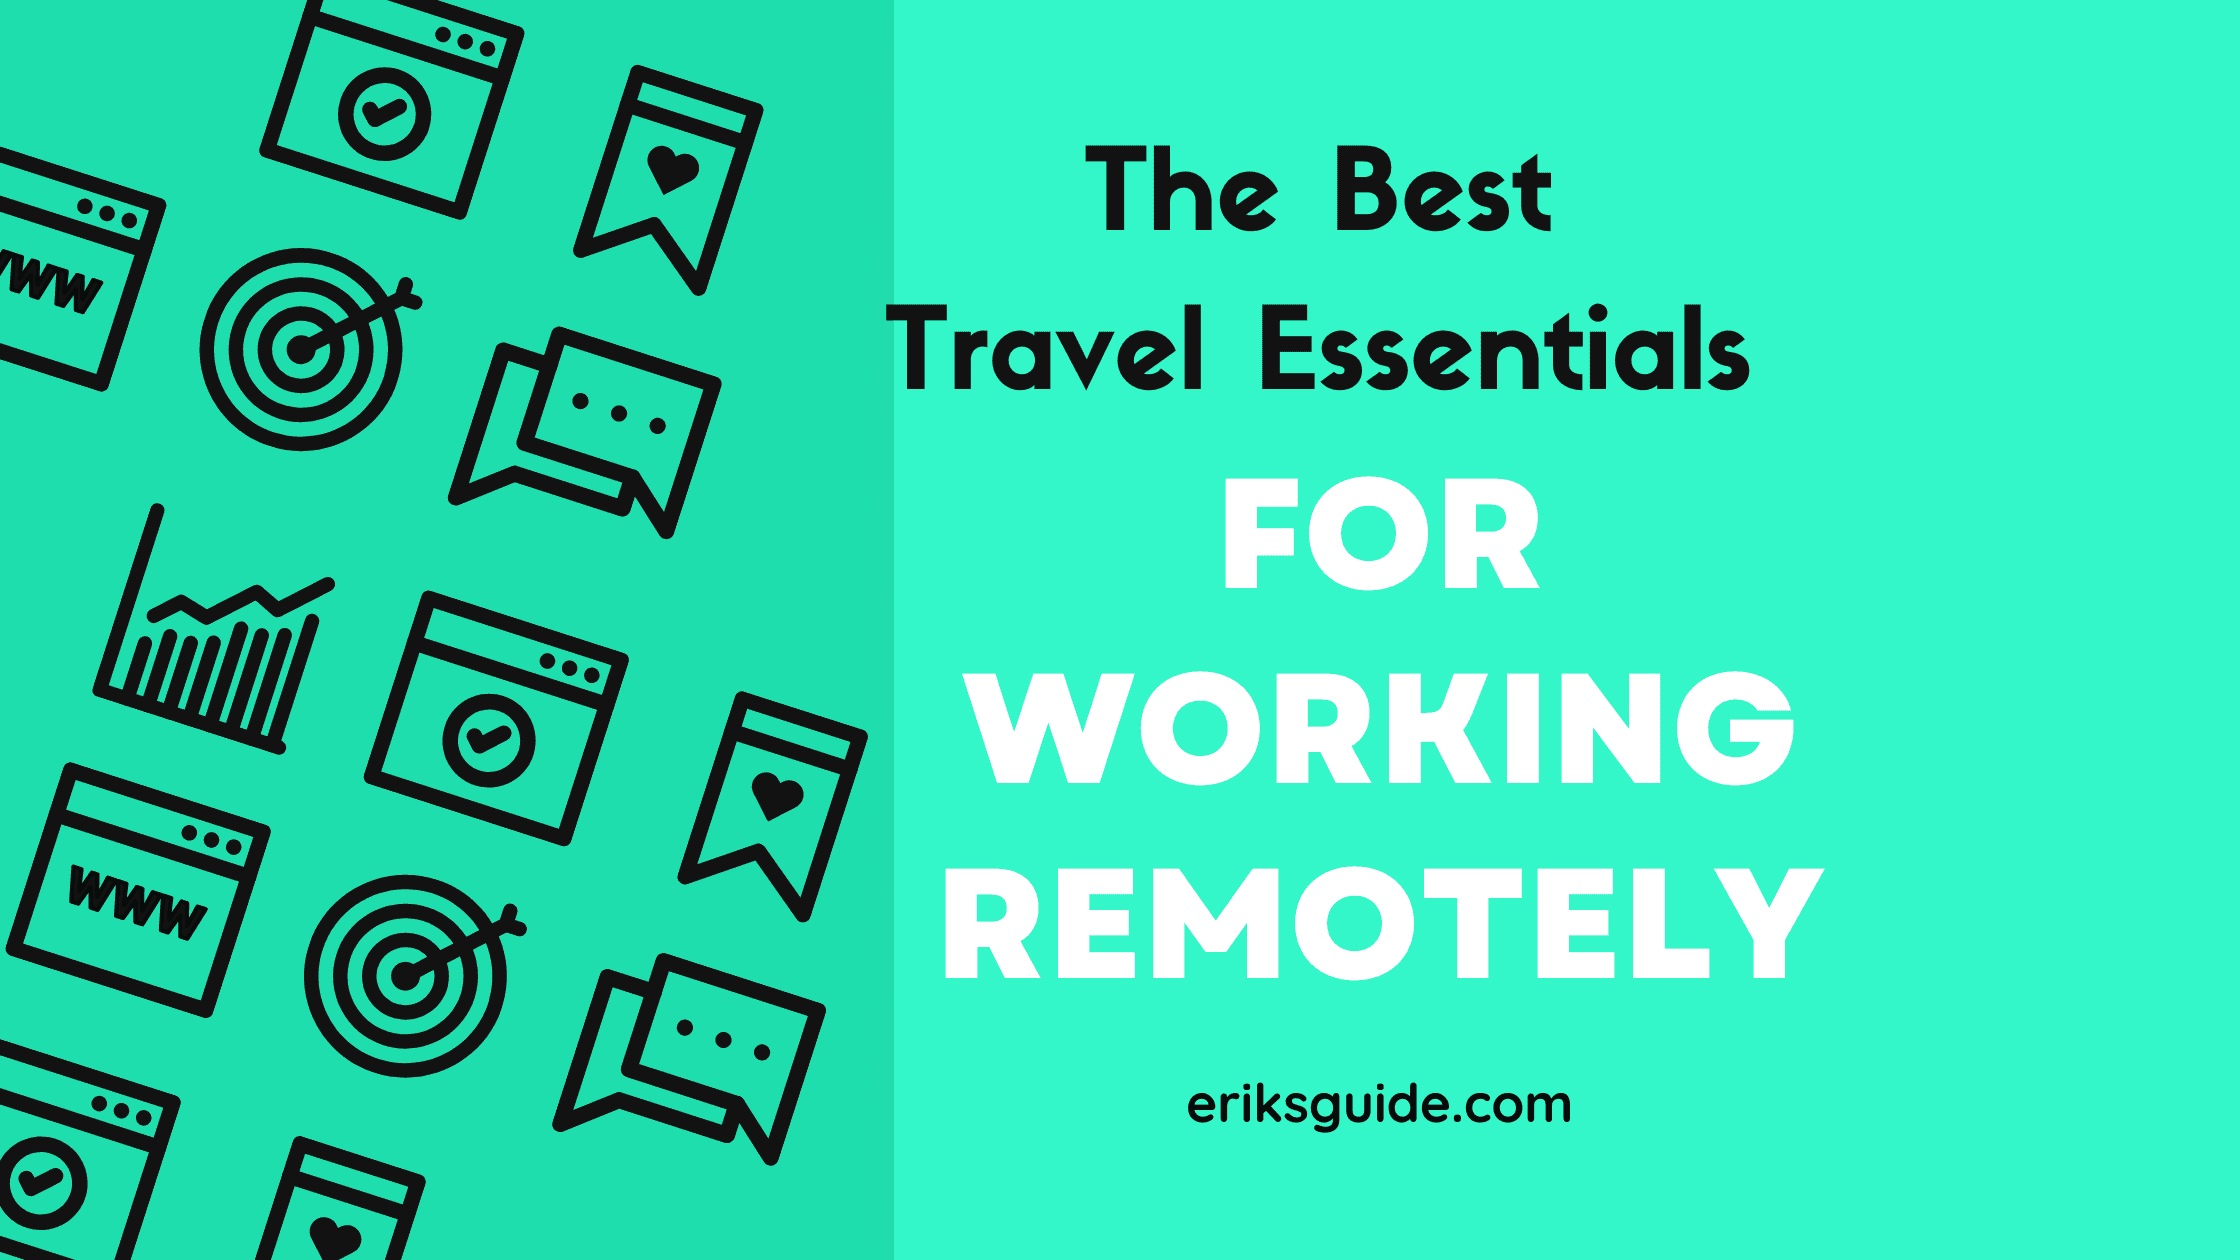 https://eriksguide.com/wp-content/uploads/2022/10/best-travel-essentials-for-working-remotely.png